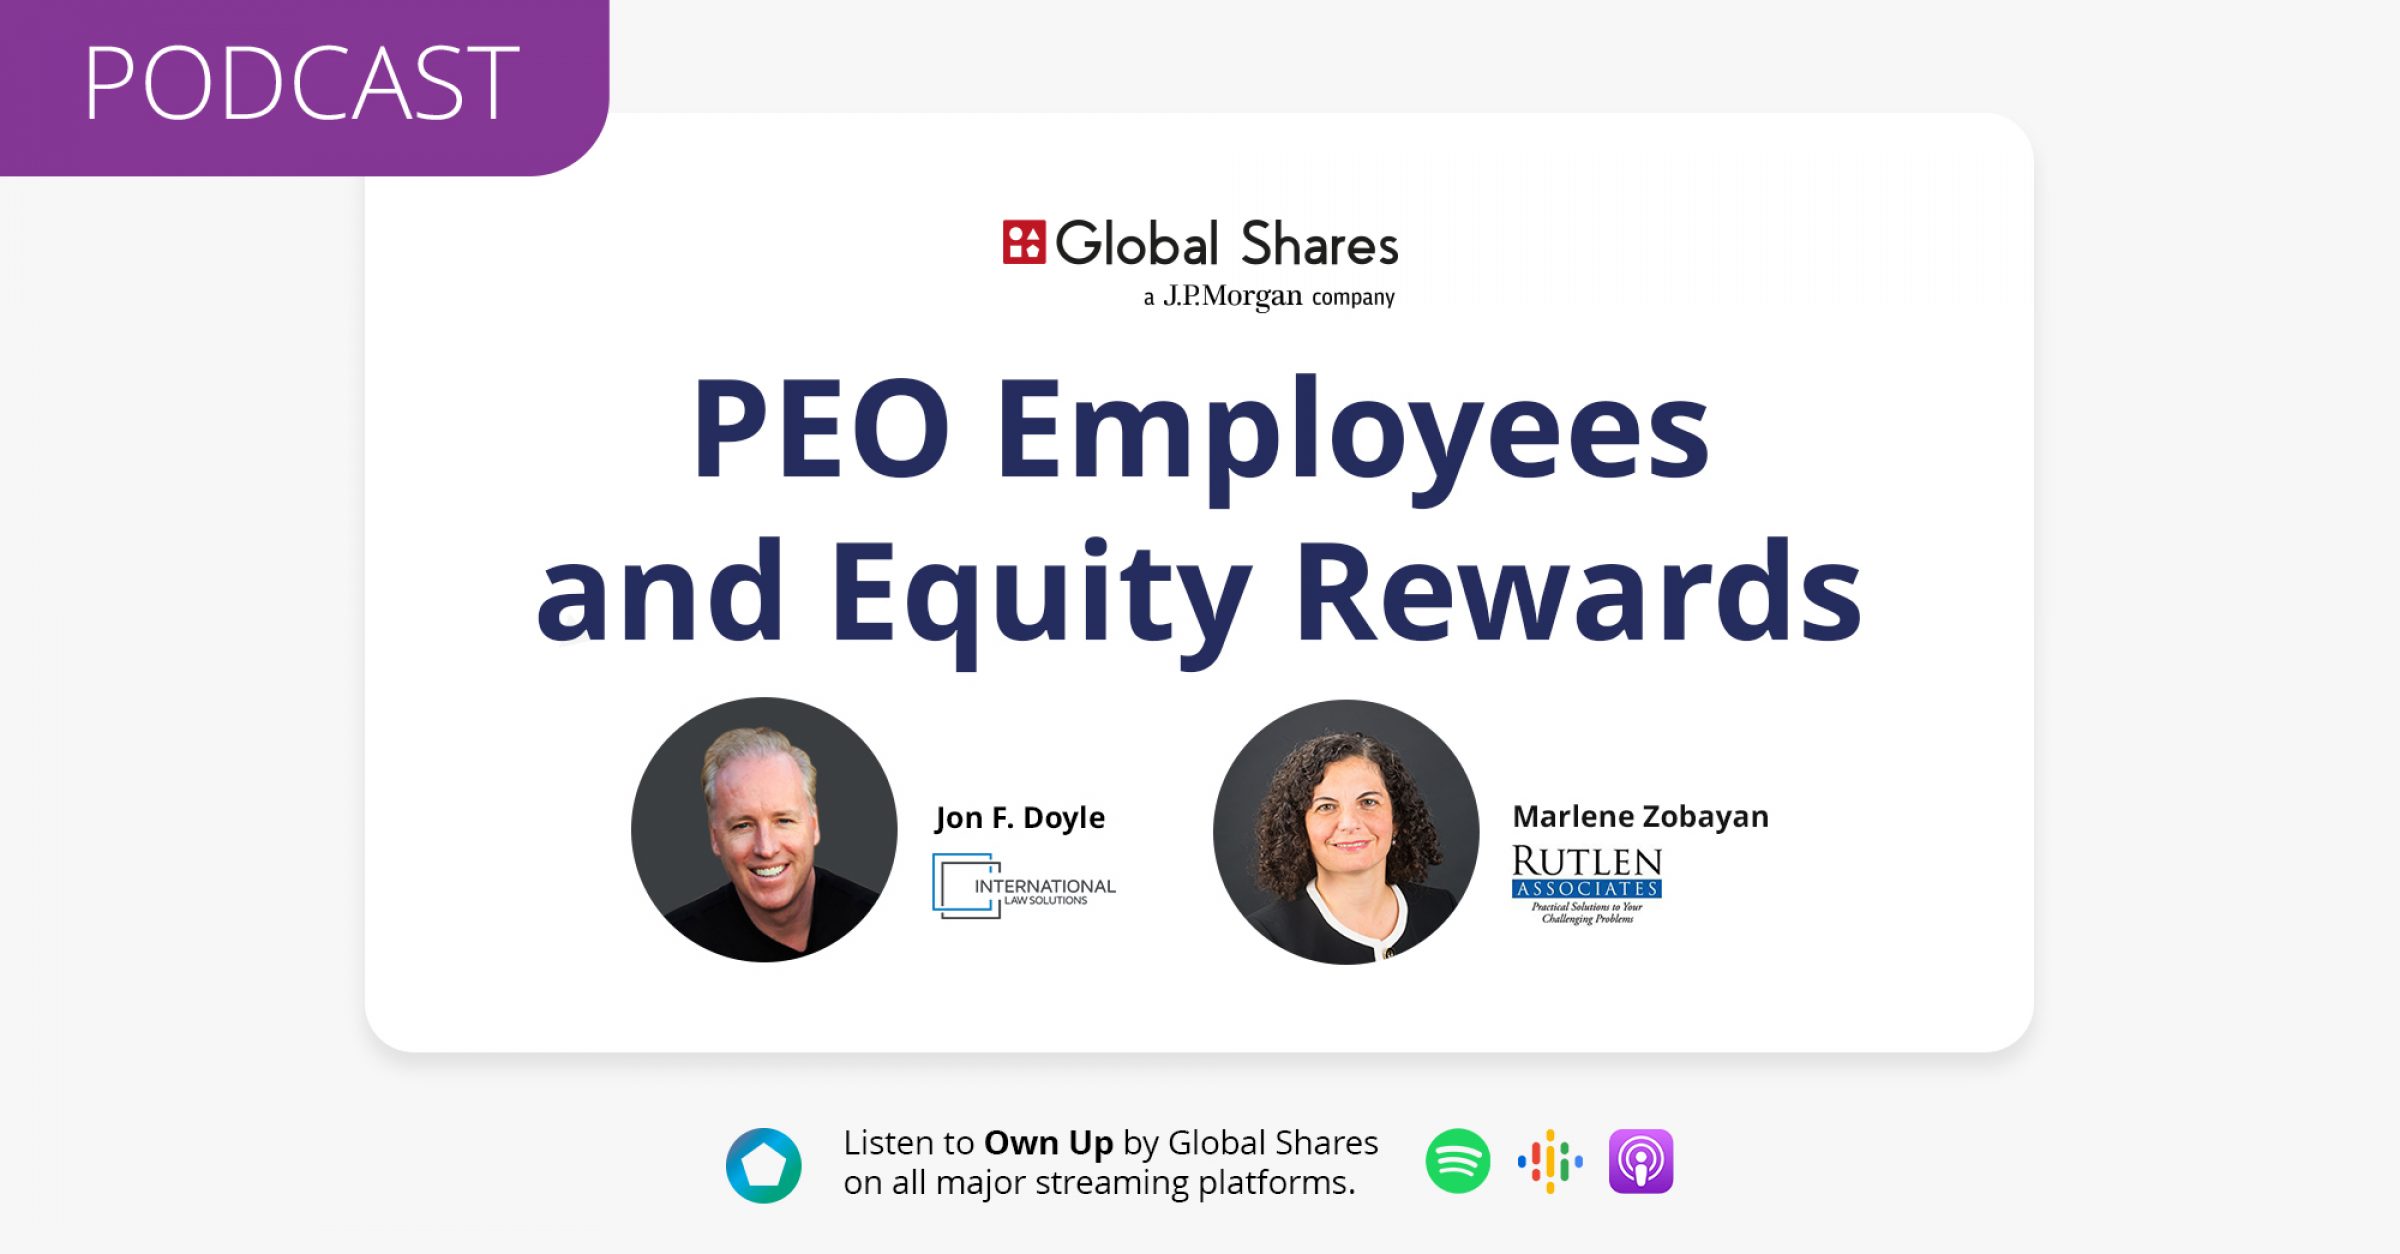 Ep16: Own Up Podcast: PEO Employees & Equity Rewards with Marlene Zobayan & Jon F. Doyle